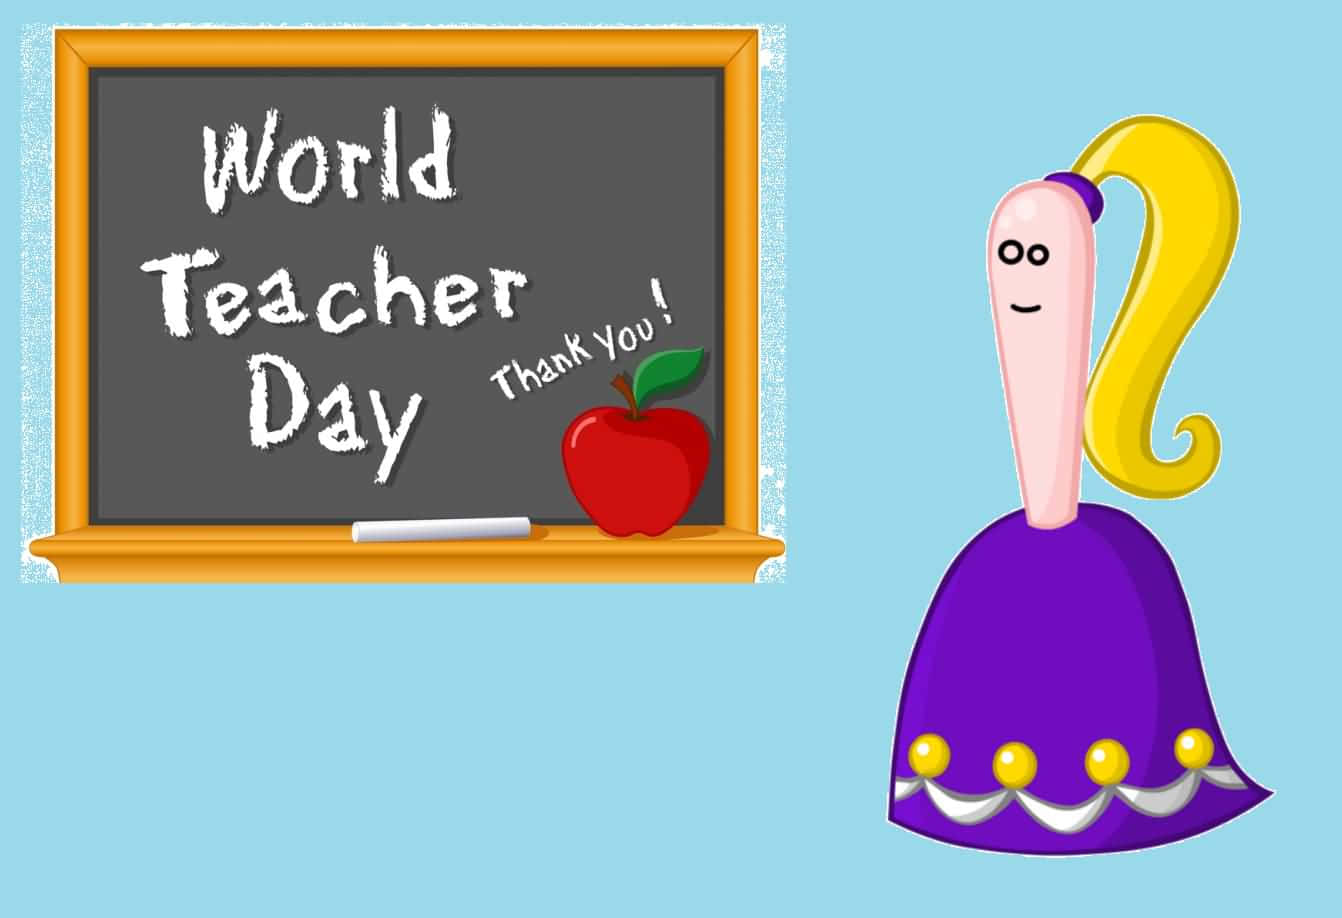 Celebrate the teachers who have had a positive impact in the lives of many this Happy Teachers Day!